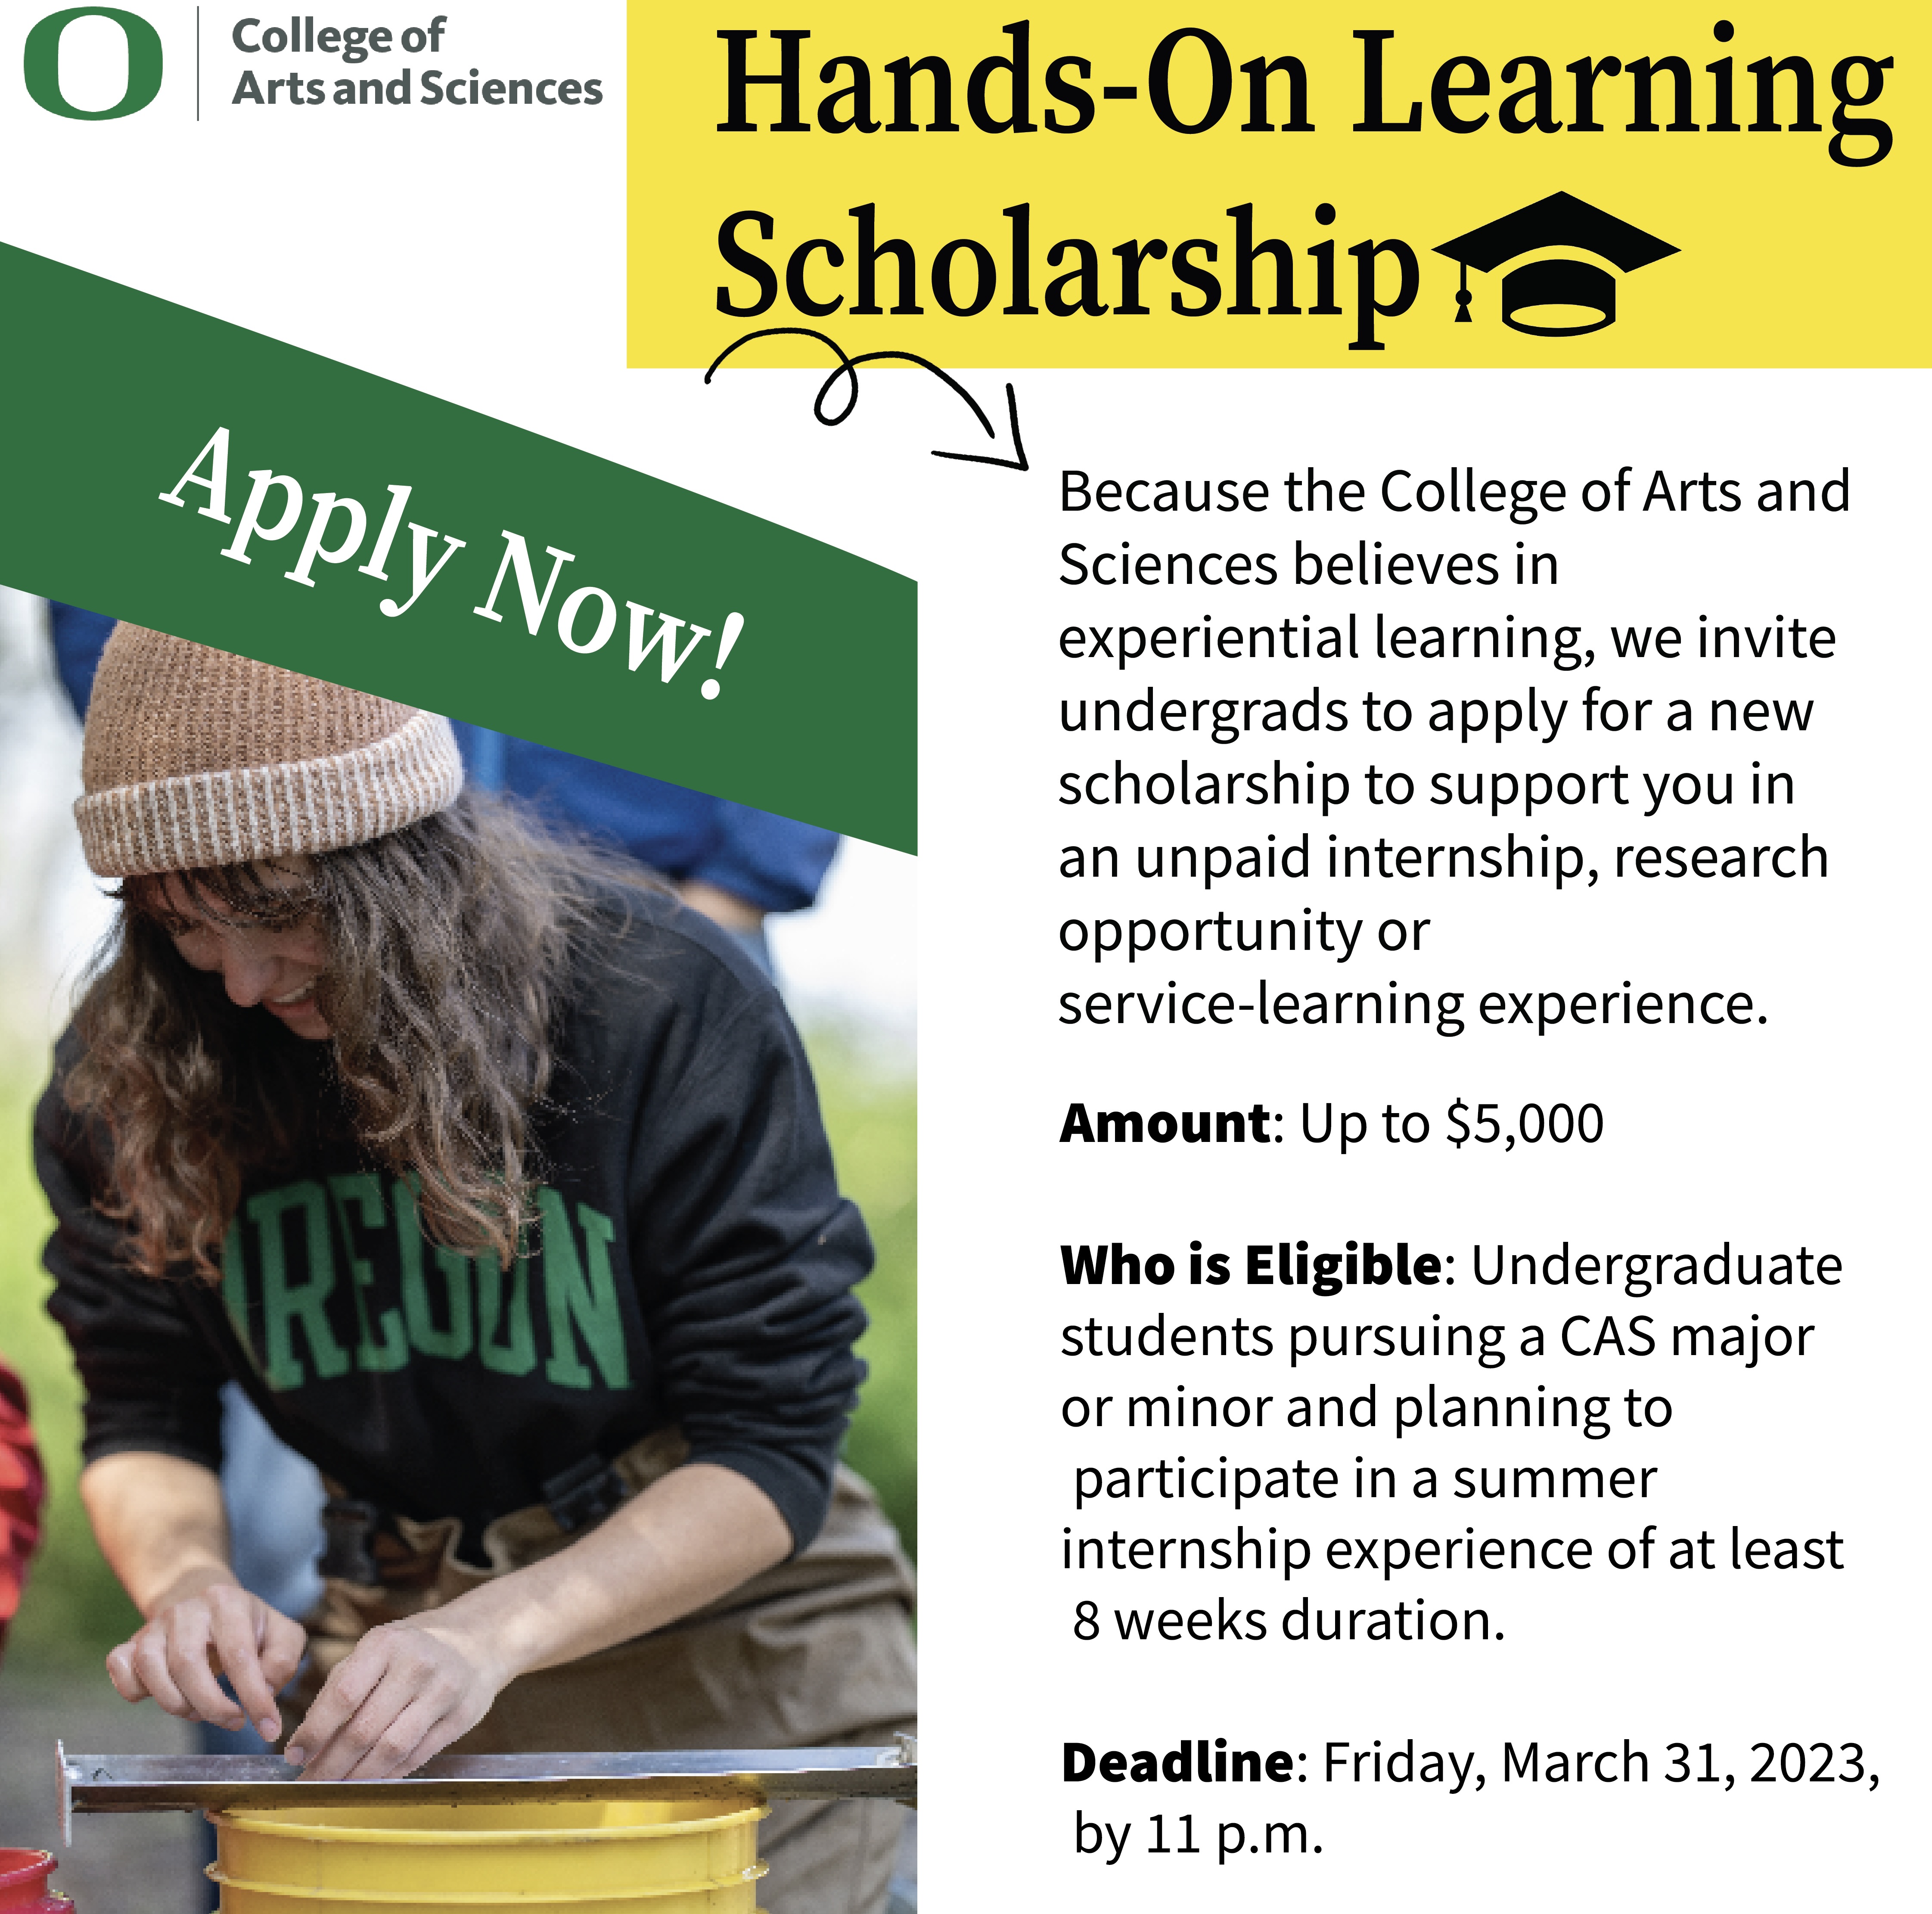 CAS Hands-On Learning Scholarship